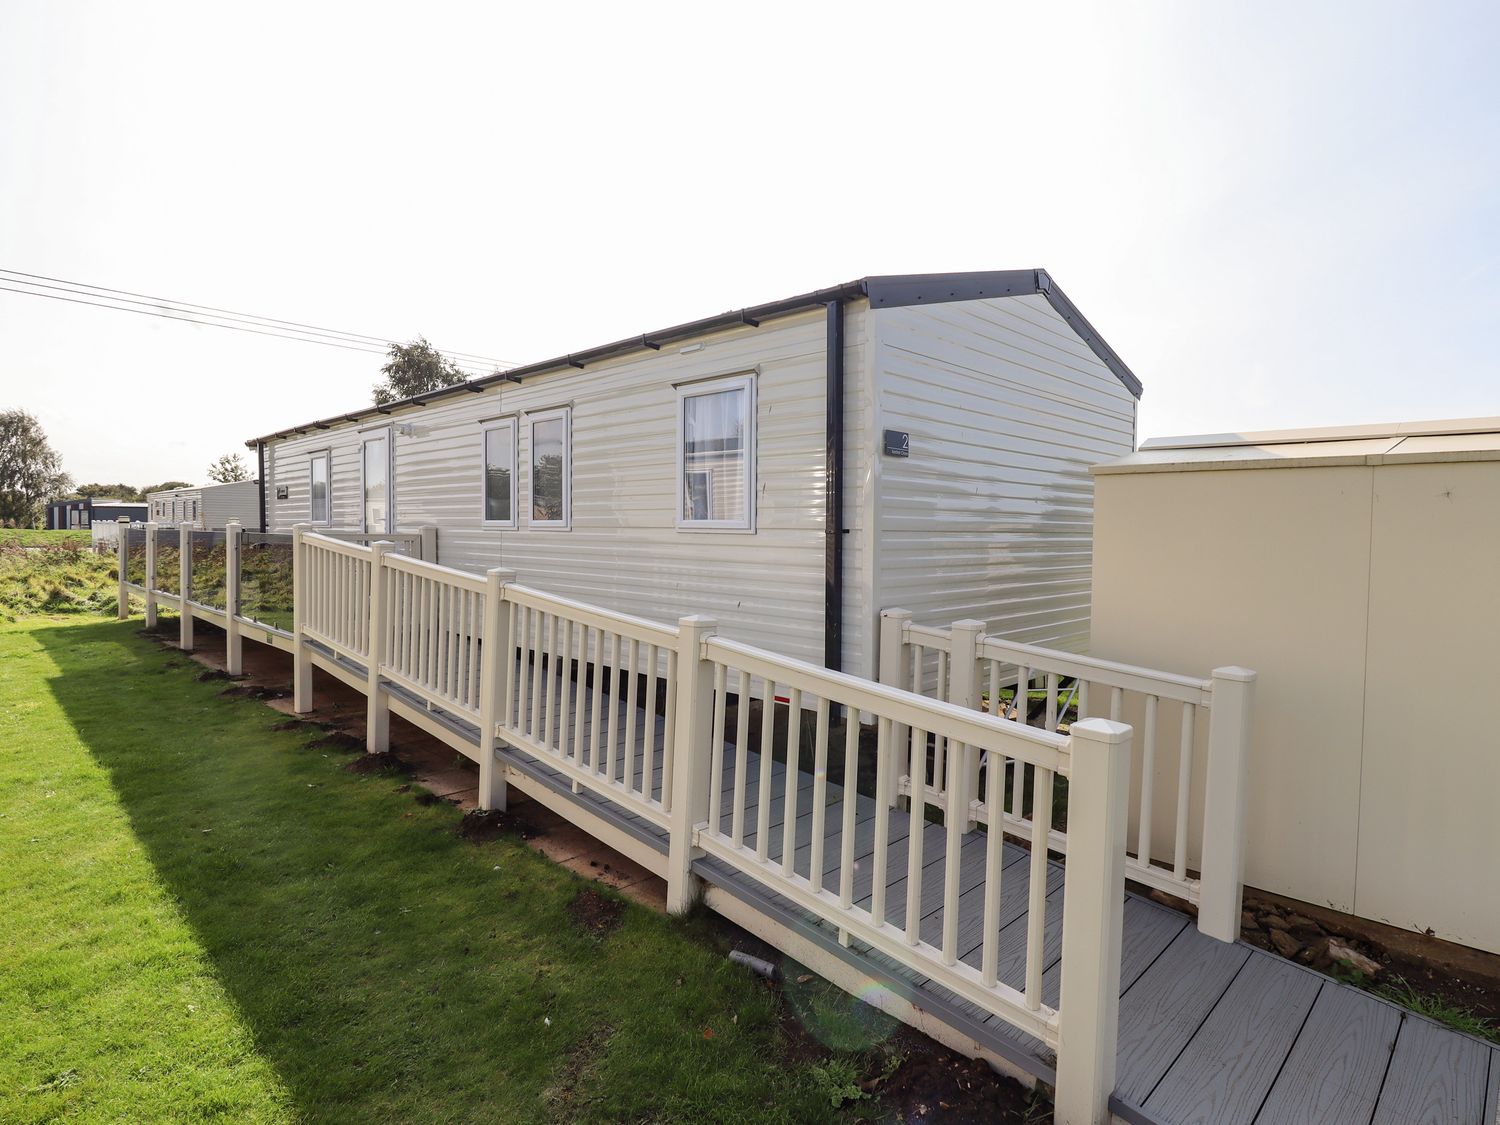 2 Kestrel Close, Tattershall, Lincolnshire. Two-bedroom lodge with hot tub. Close to lake and shops.